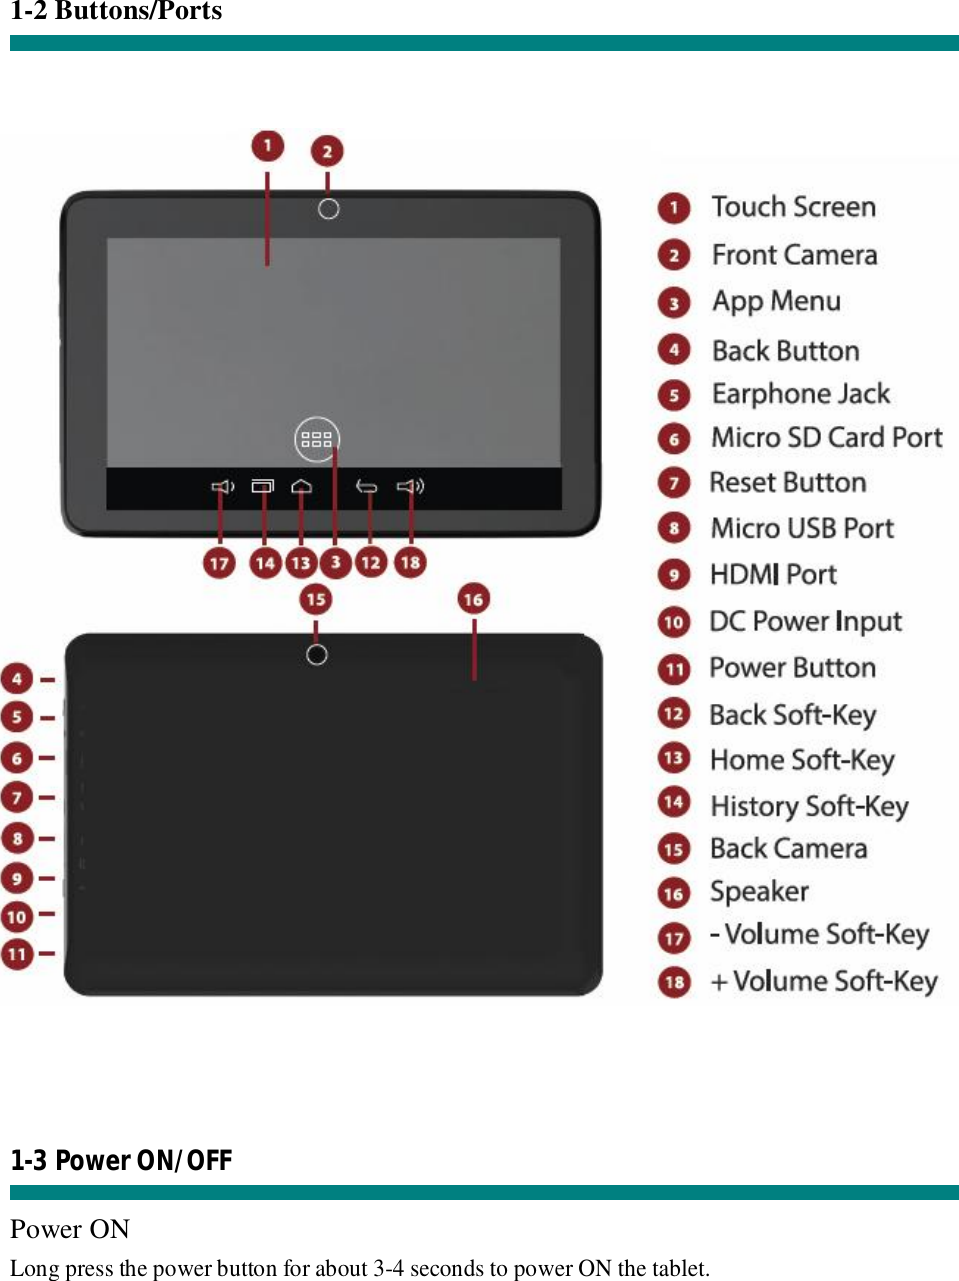 1-2 Buttons/Ports            1-3 Power ON/OFF  Power ON Long press the power button for about 3-4 seconds to power ON the tablet.    